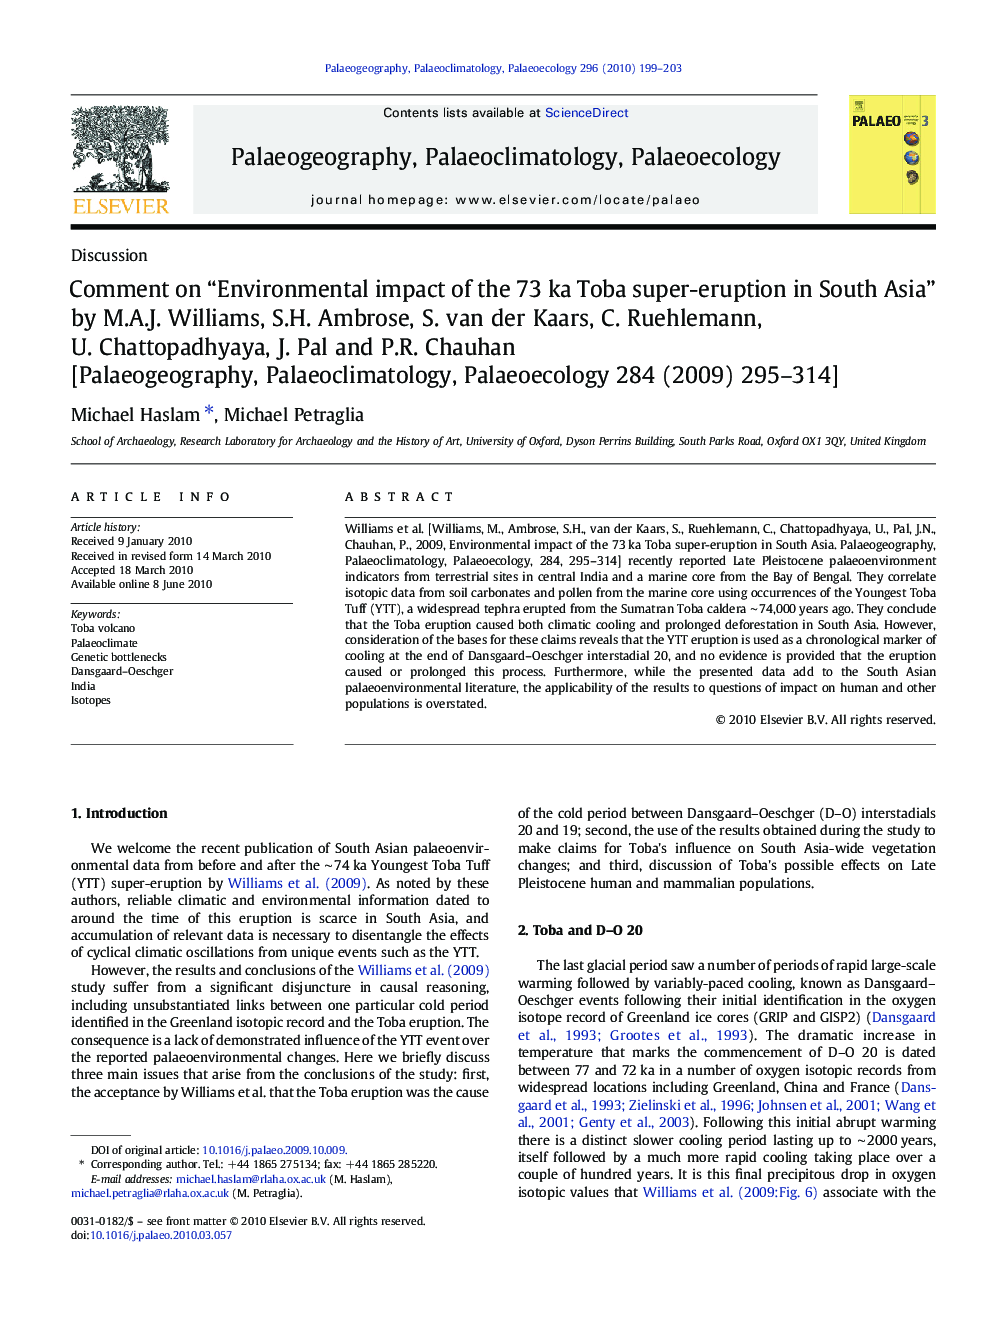 Comment on “Environmental impact of the 73 ka Toba super-eruption in South Asia” by M.A.J. Williams, S.H. Ambrose, S. van der Kaars, C. Ruehlemann, U. Chattopadhyaya, J. Pal and P.R. Chauhan [Palaeogeography, Palaeoclimatology, Palaeoecology 284 (2009) 29